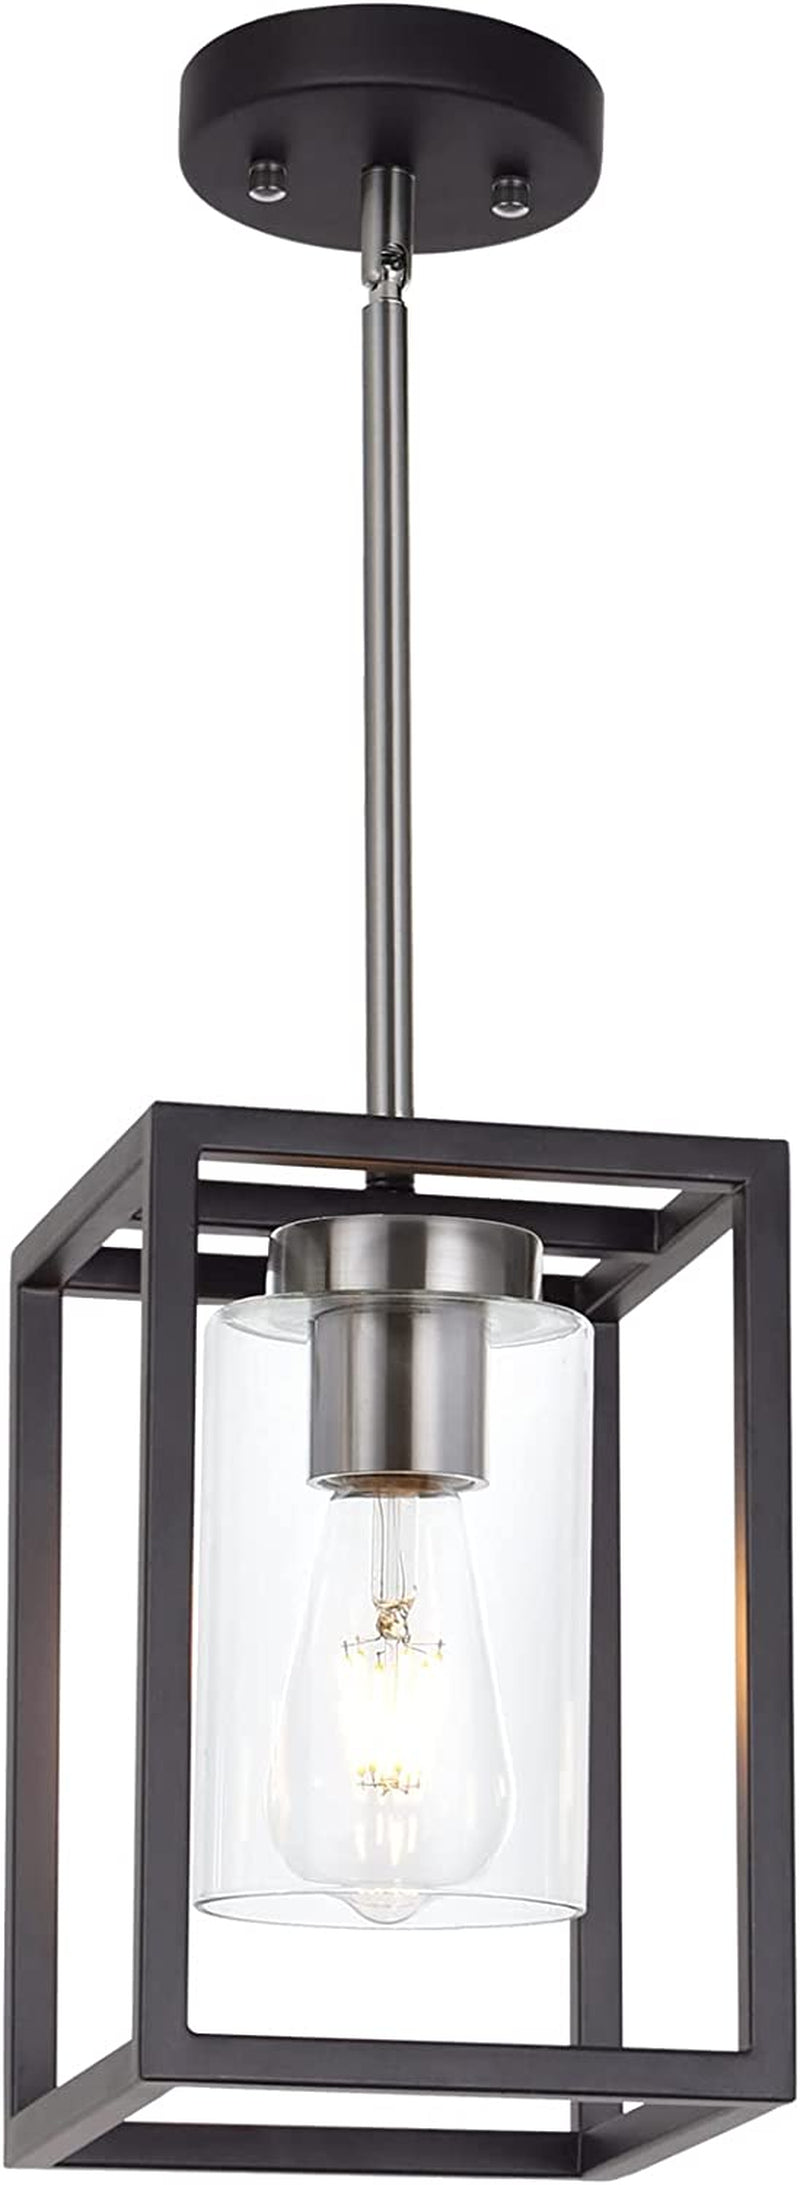 VINLUZ Single 1 Light Black and Brushed Nickel Modern Glass Pendant Light Industrial Modern Metal Chandelier with Clear Glass Shade for Dining Room Kitchen Island Foyer Cafe Home & Garden > Lighting > Lighting Fixtures VINLUZ Black and Brushed Nickel 1 Light 